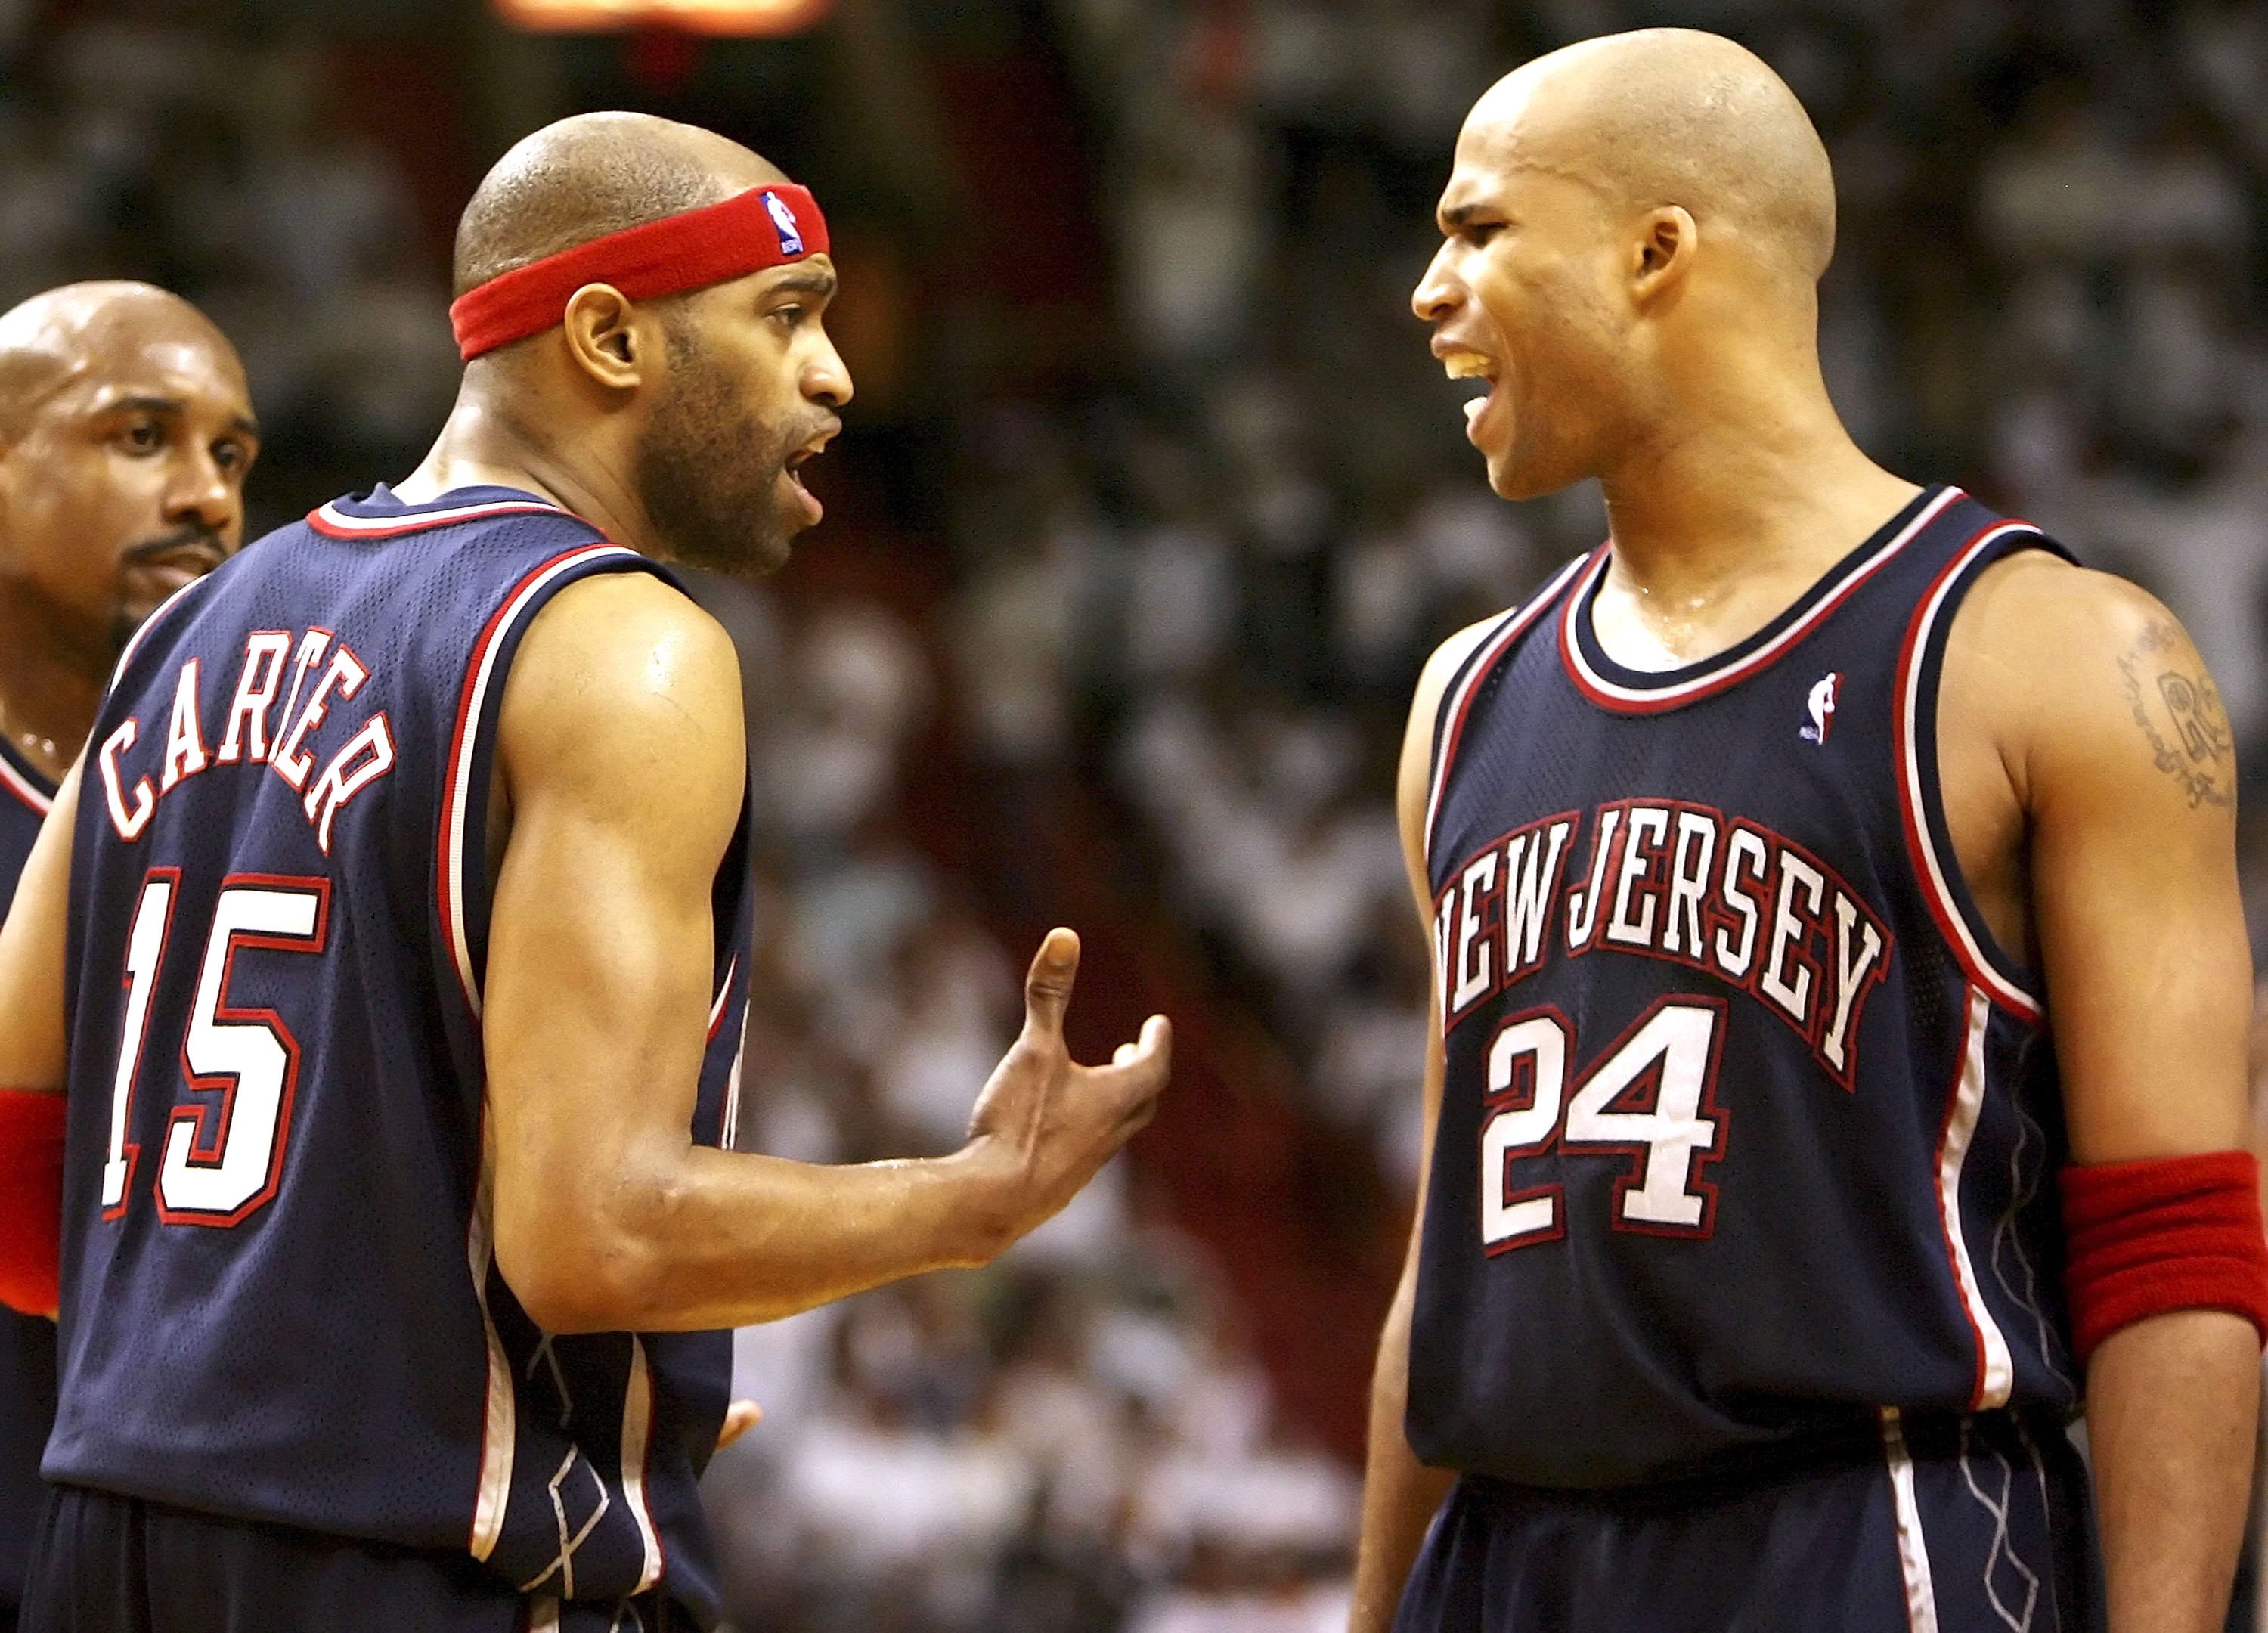 Vince Carter and Richard Jefferson argue during a New Jersey Nets playoff game in 2006